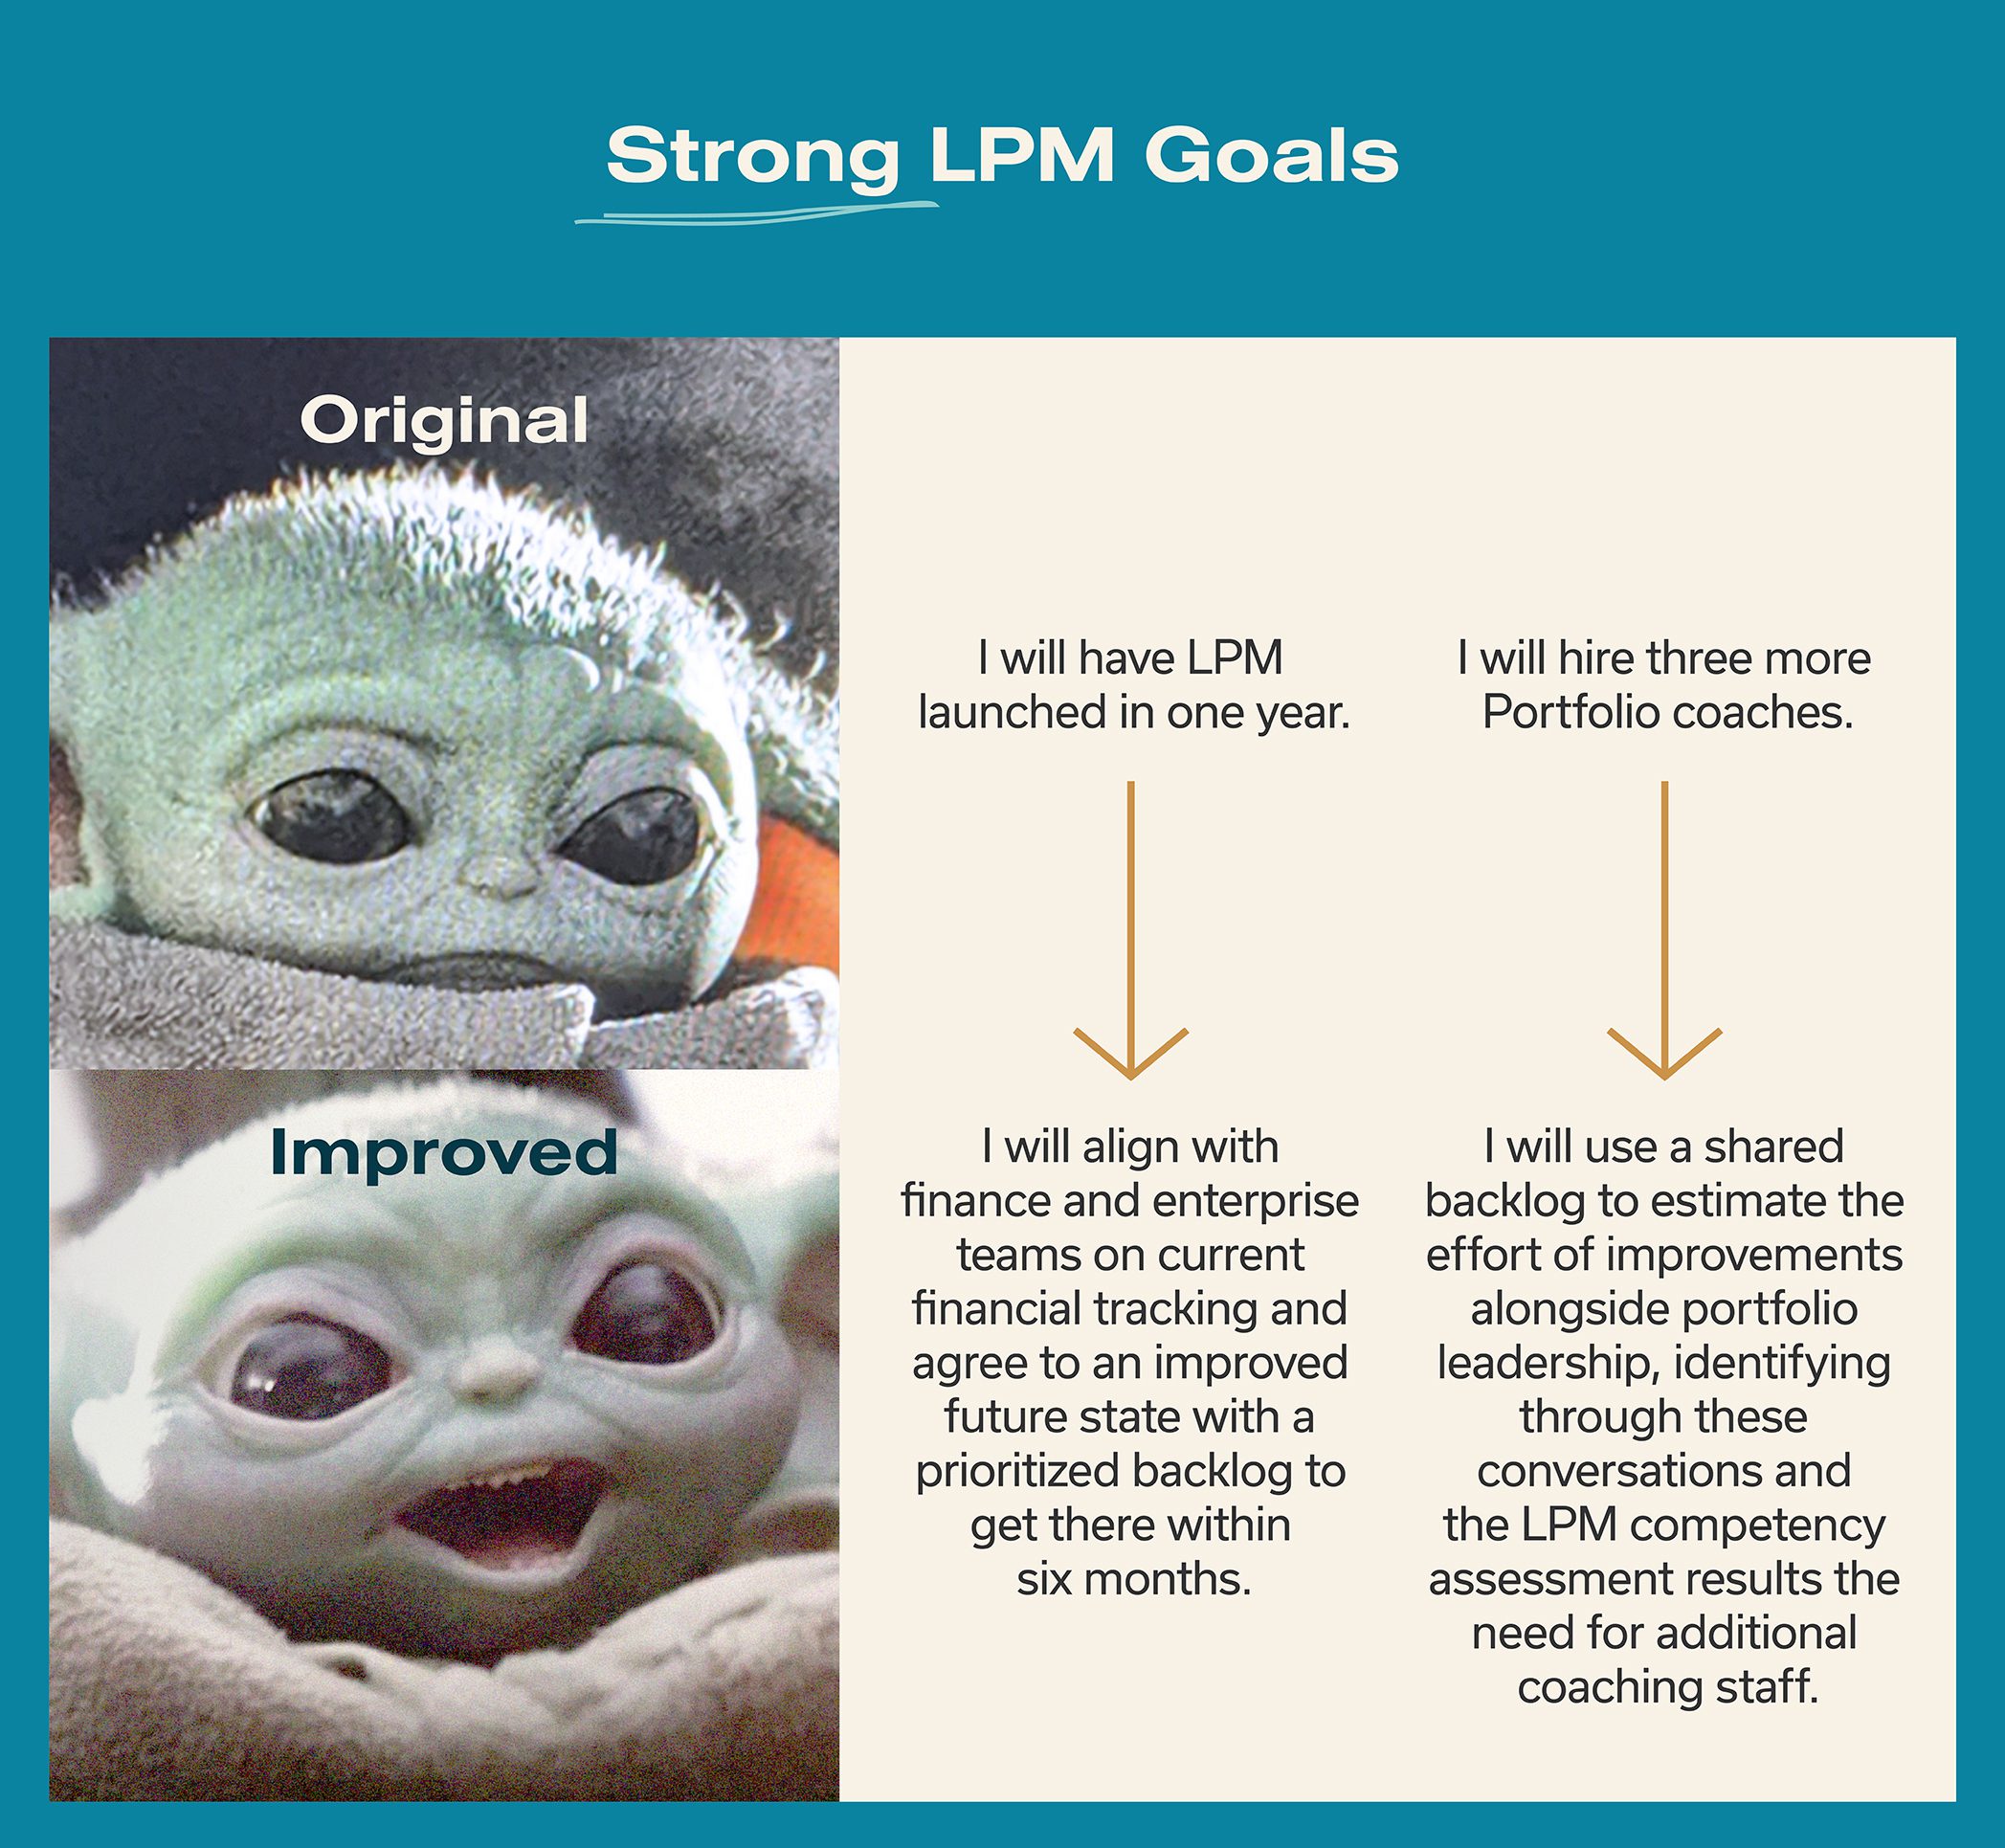 Strong LPM Goal examples (same as the ones from the text)